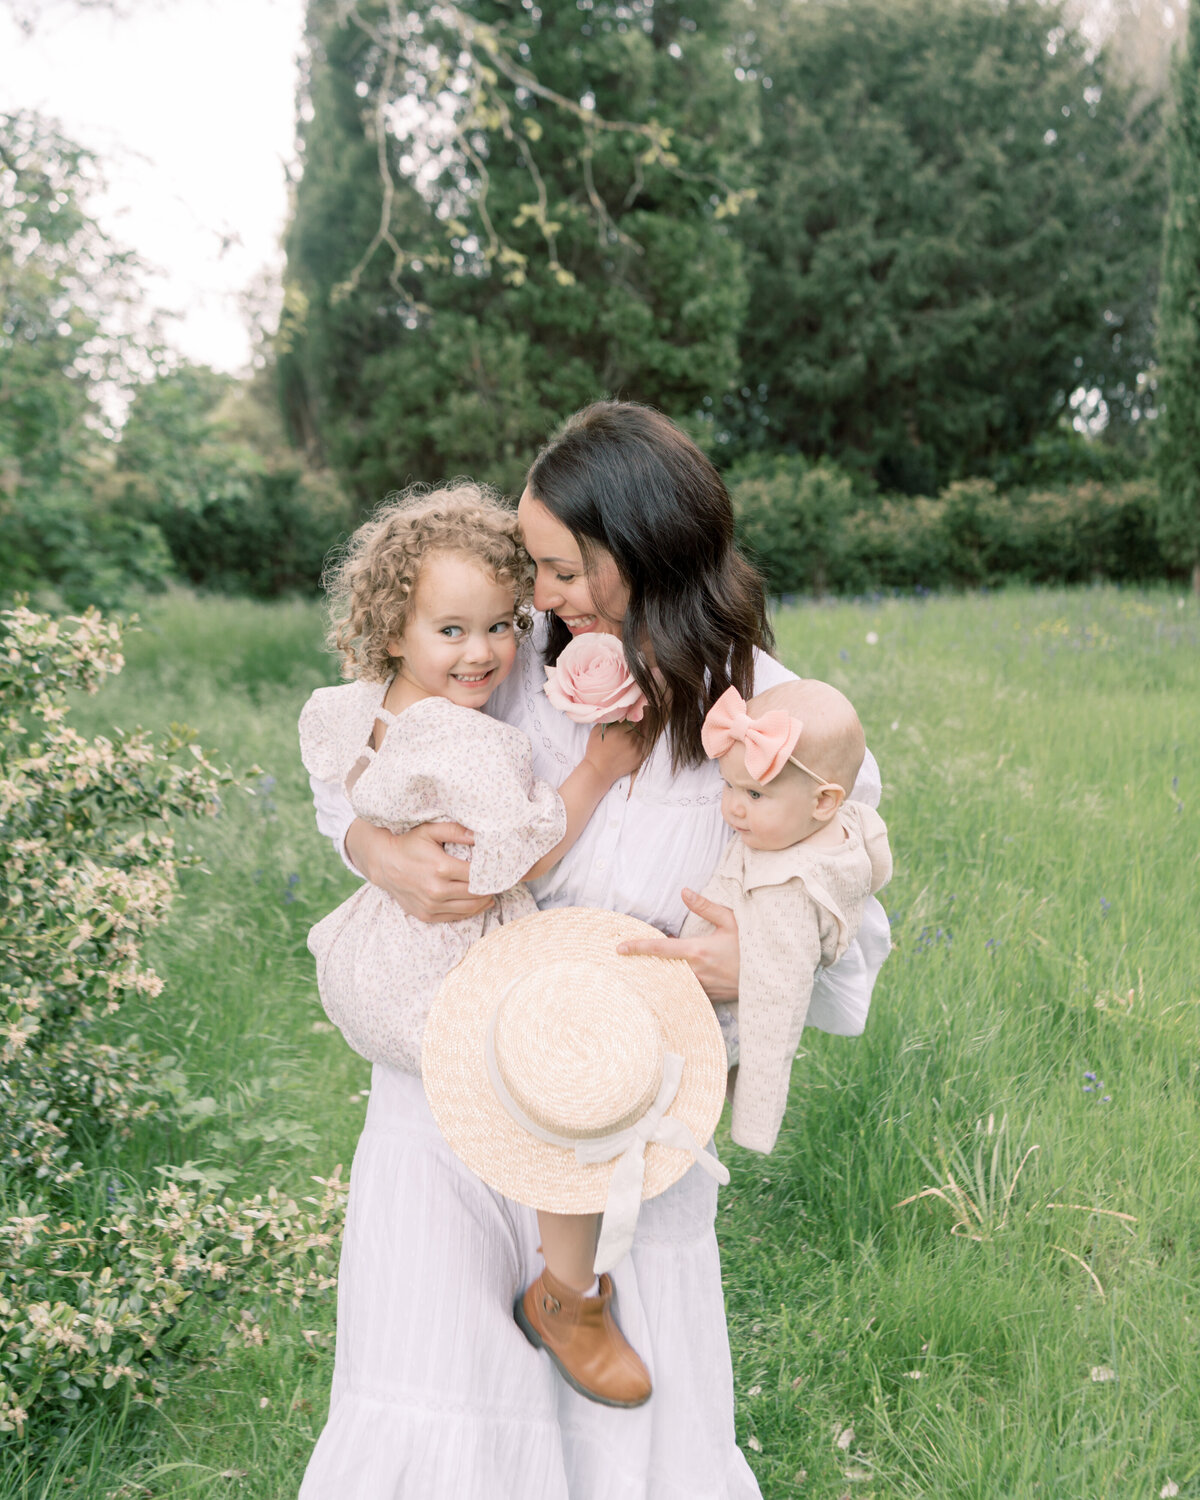 Mom and daughter giggle together as mother carries children in gardens by Savannah family photographer Courtney Cronin